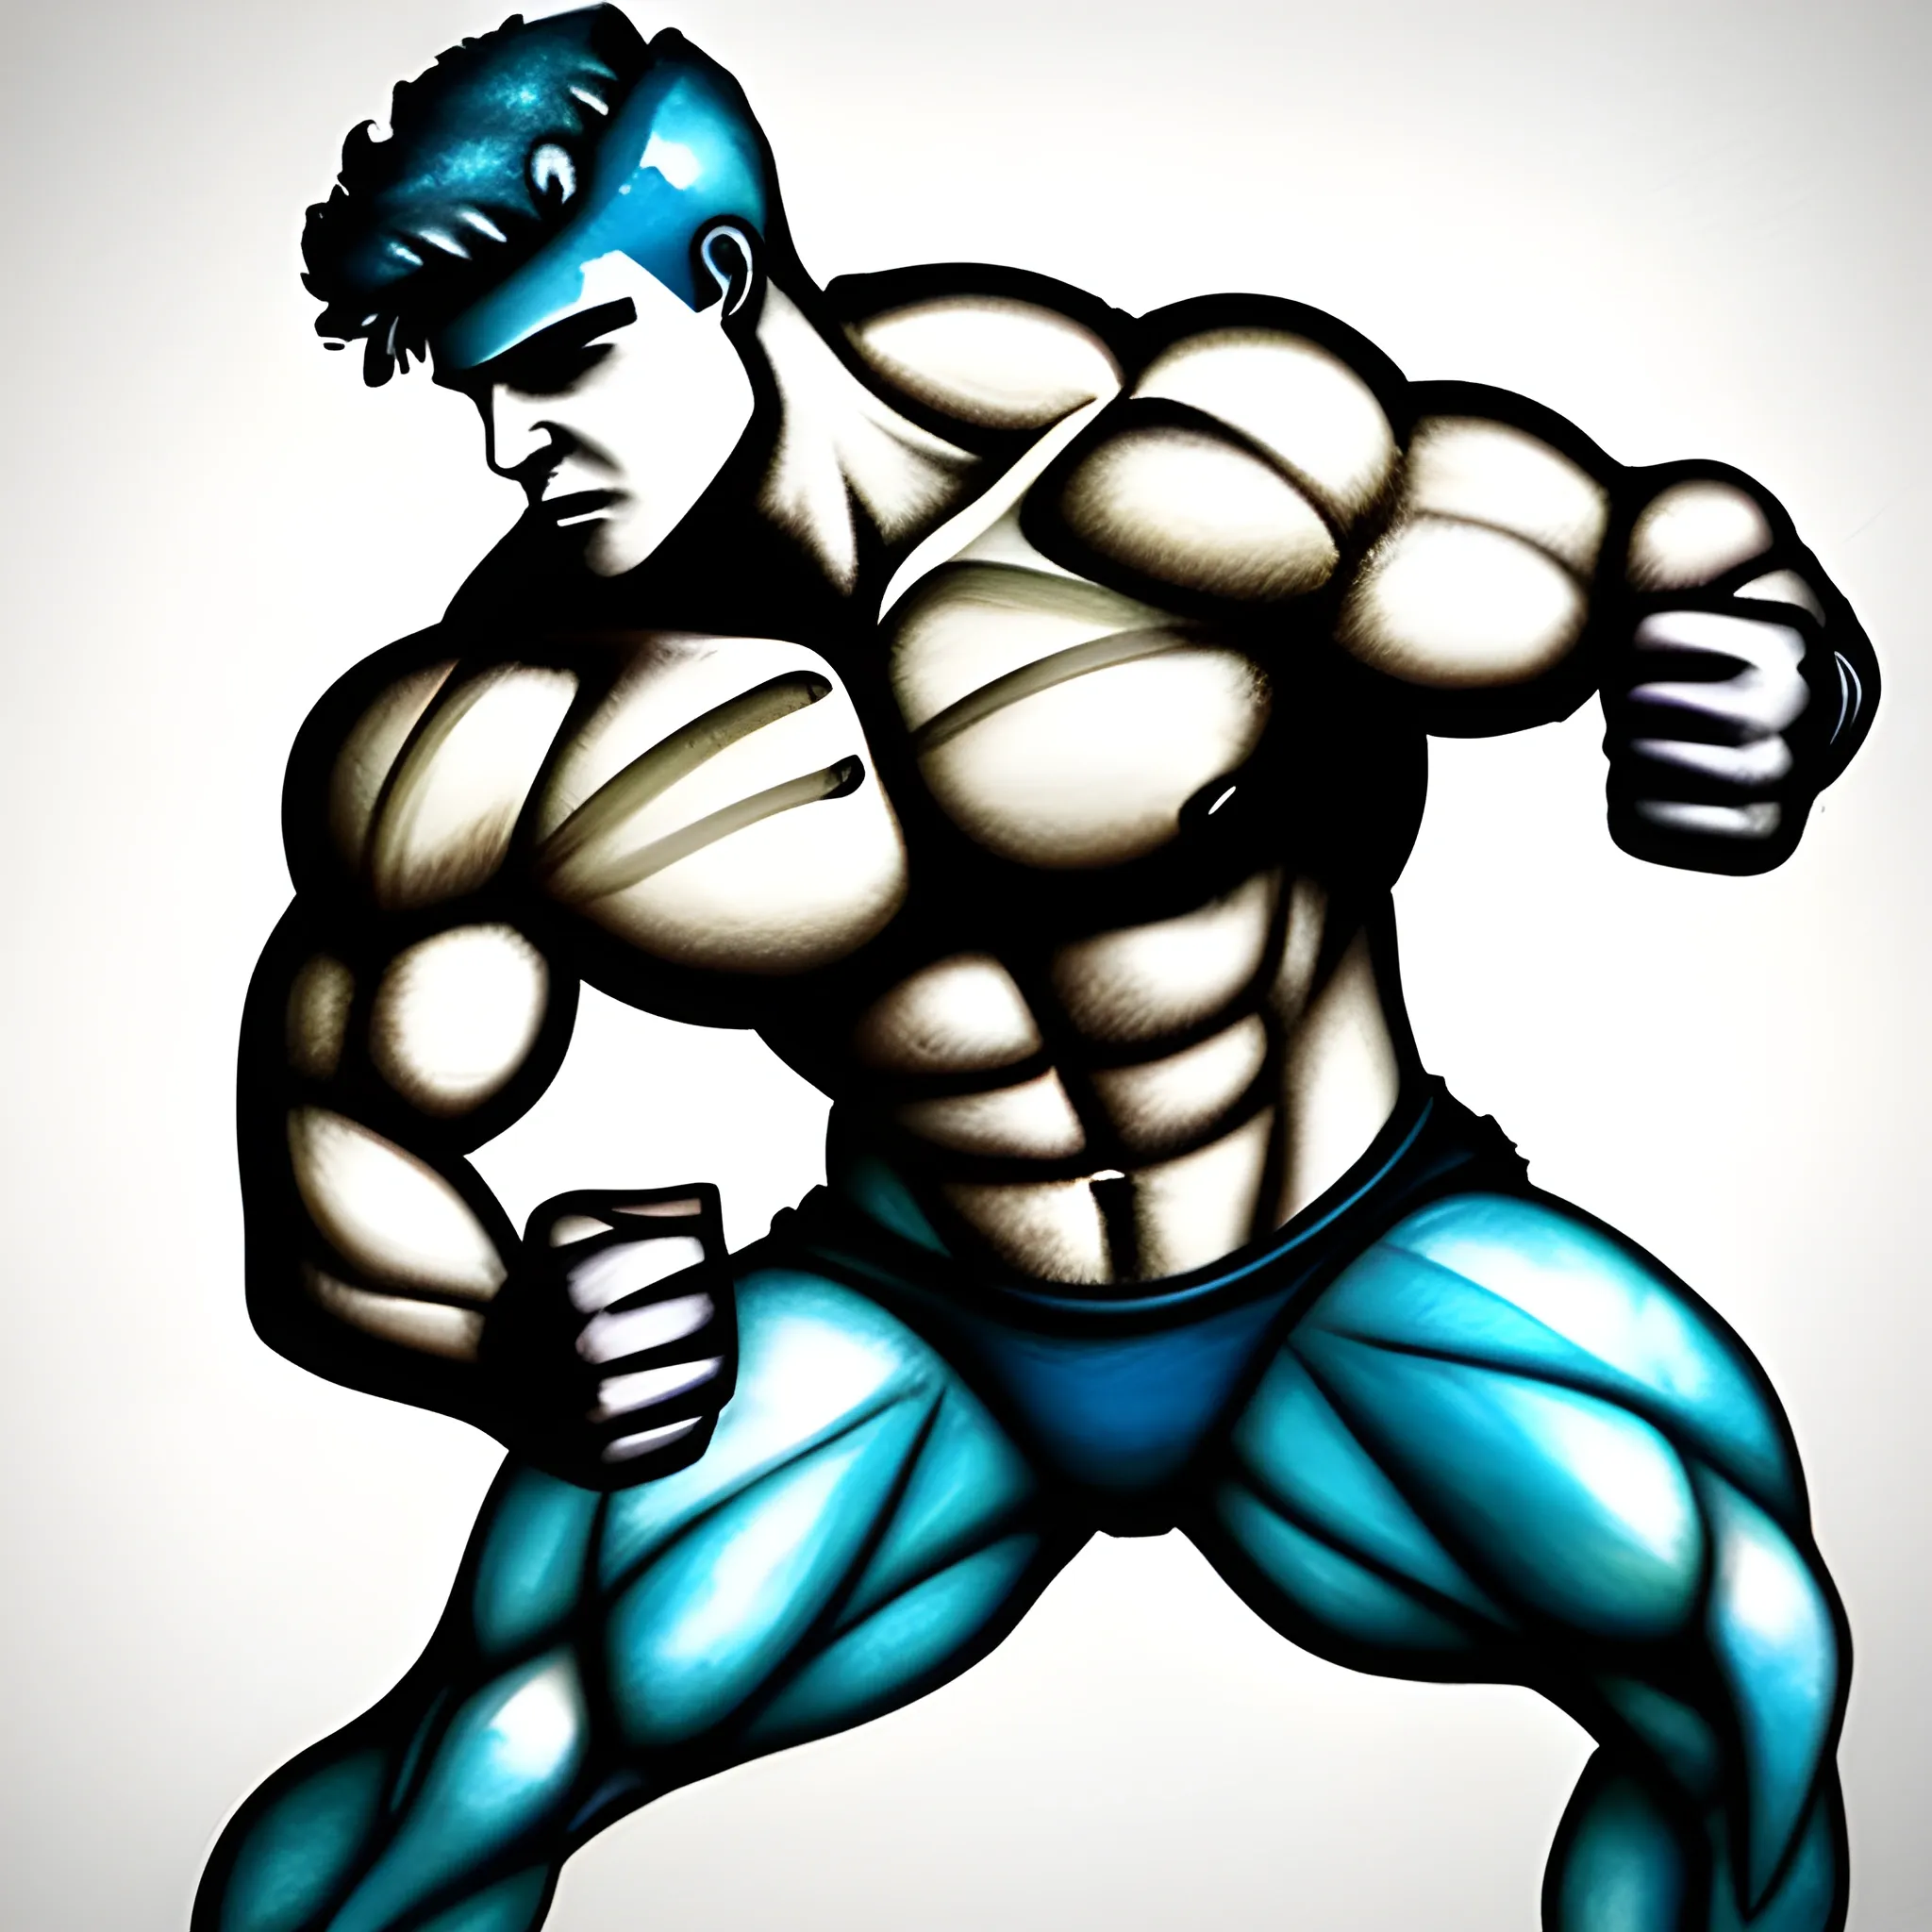 App Logo for a sportsapp named "BodyBuddy"
Should have Bodybuilding parts in it. , Water Color